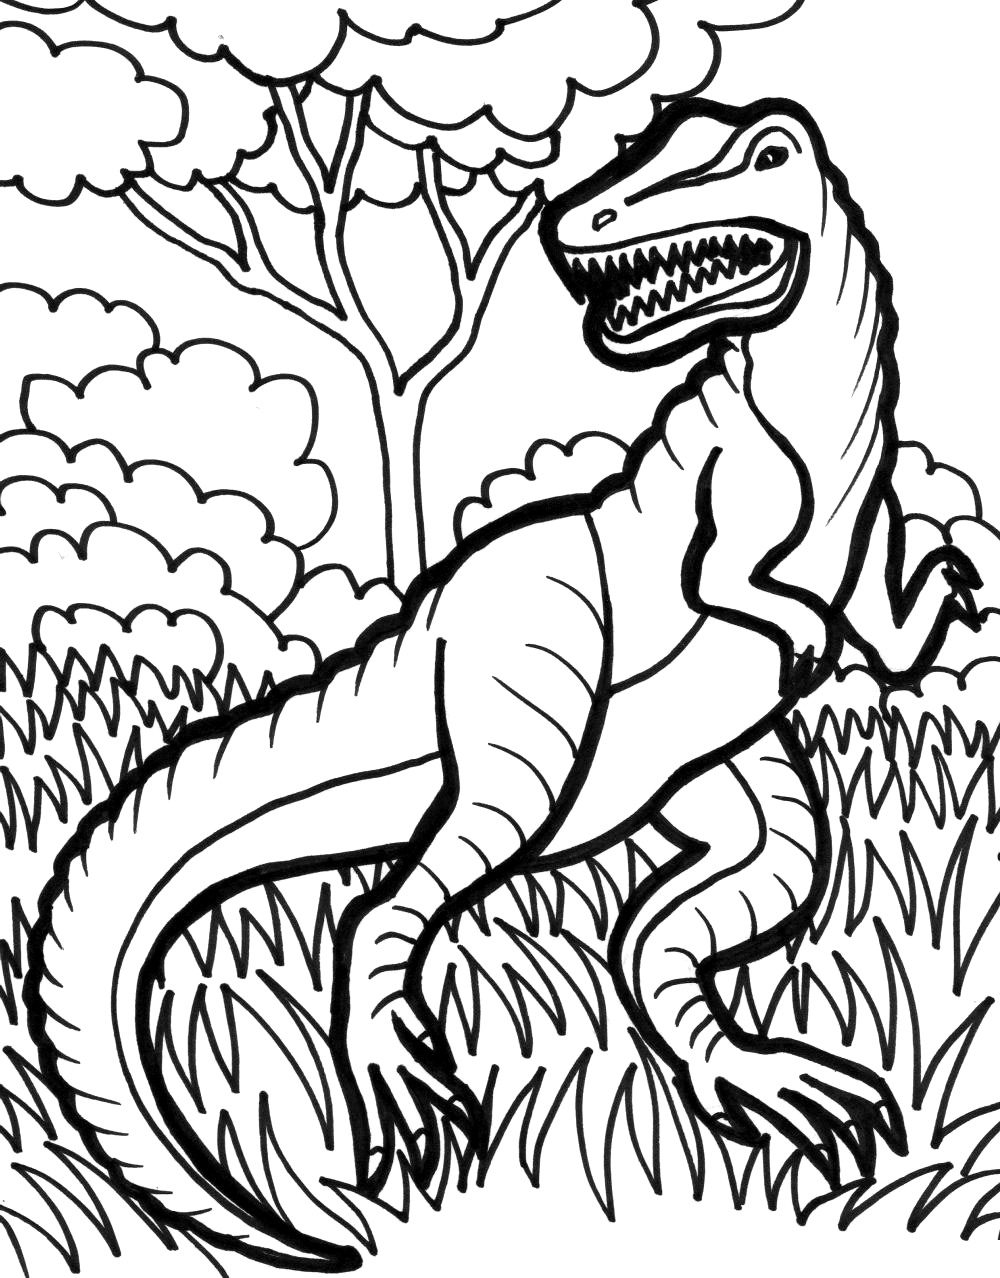 TRex Coloring Pages - Best Coloring Pages For Kids